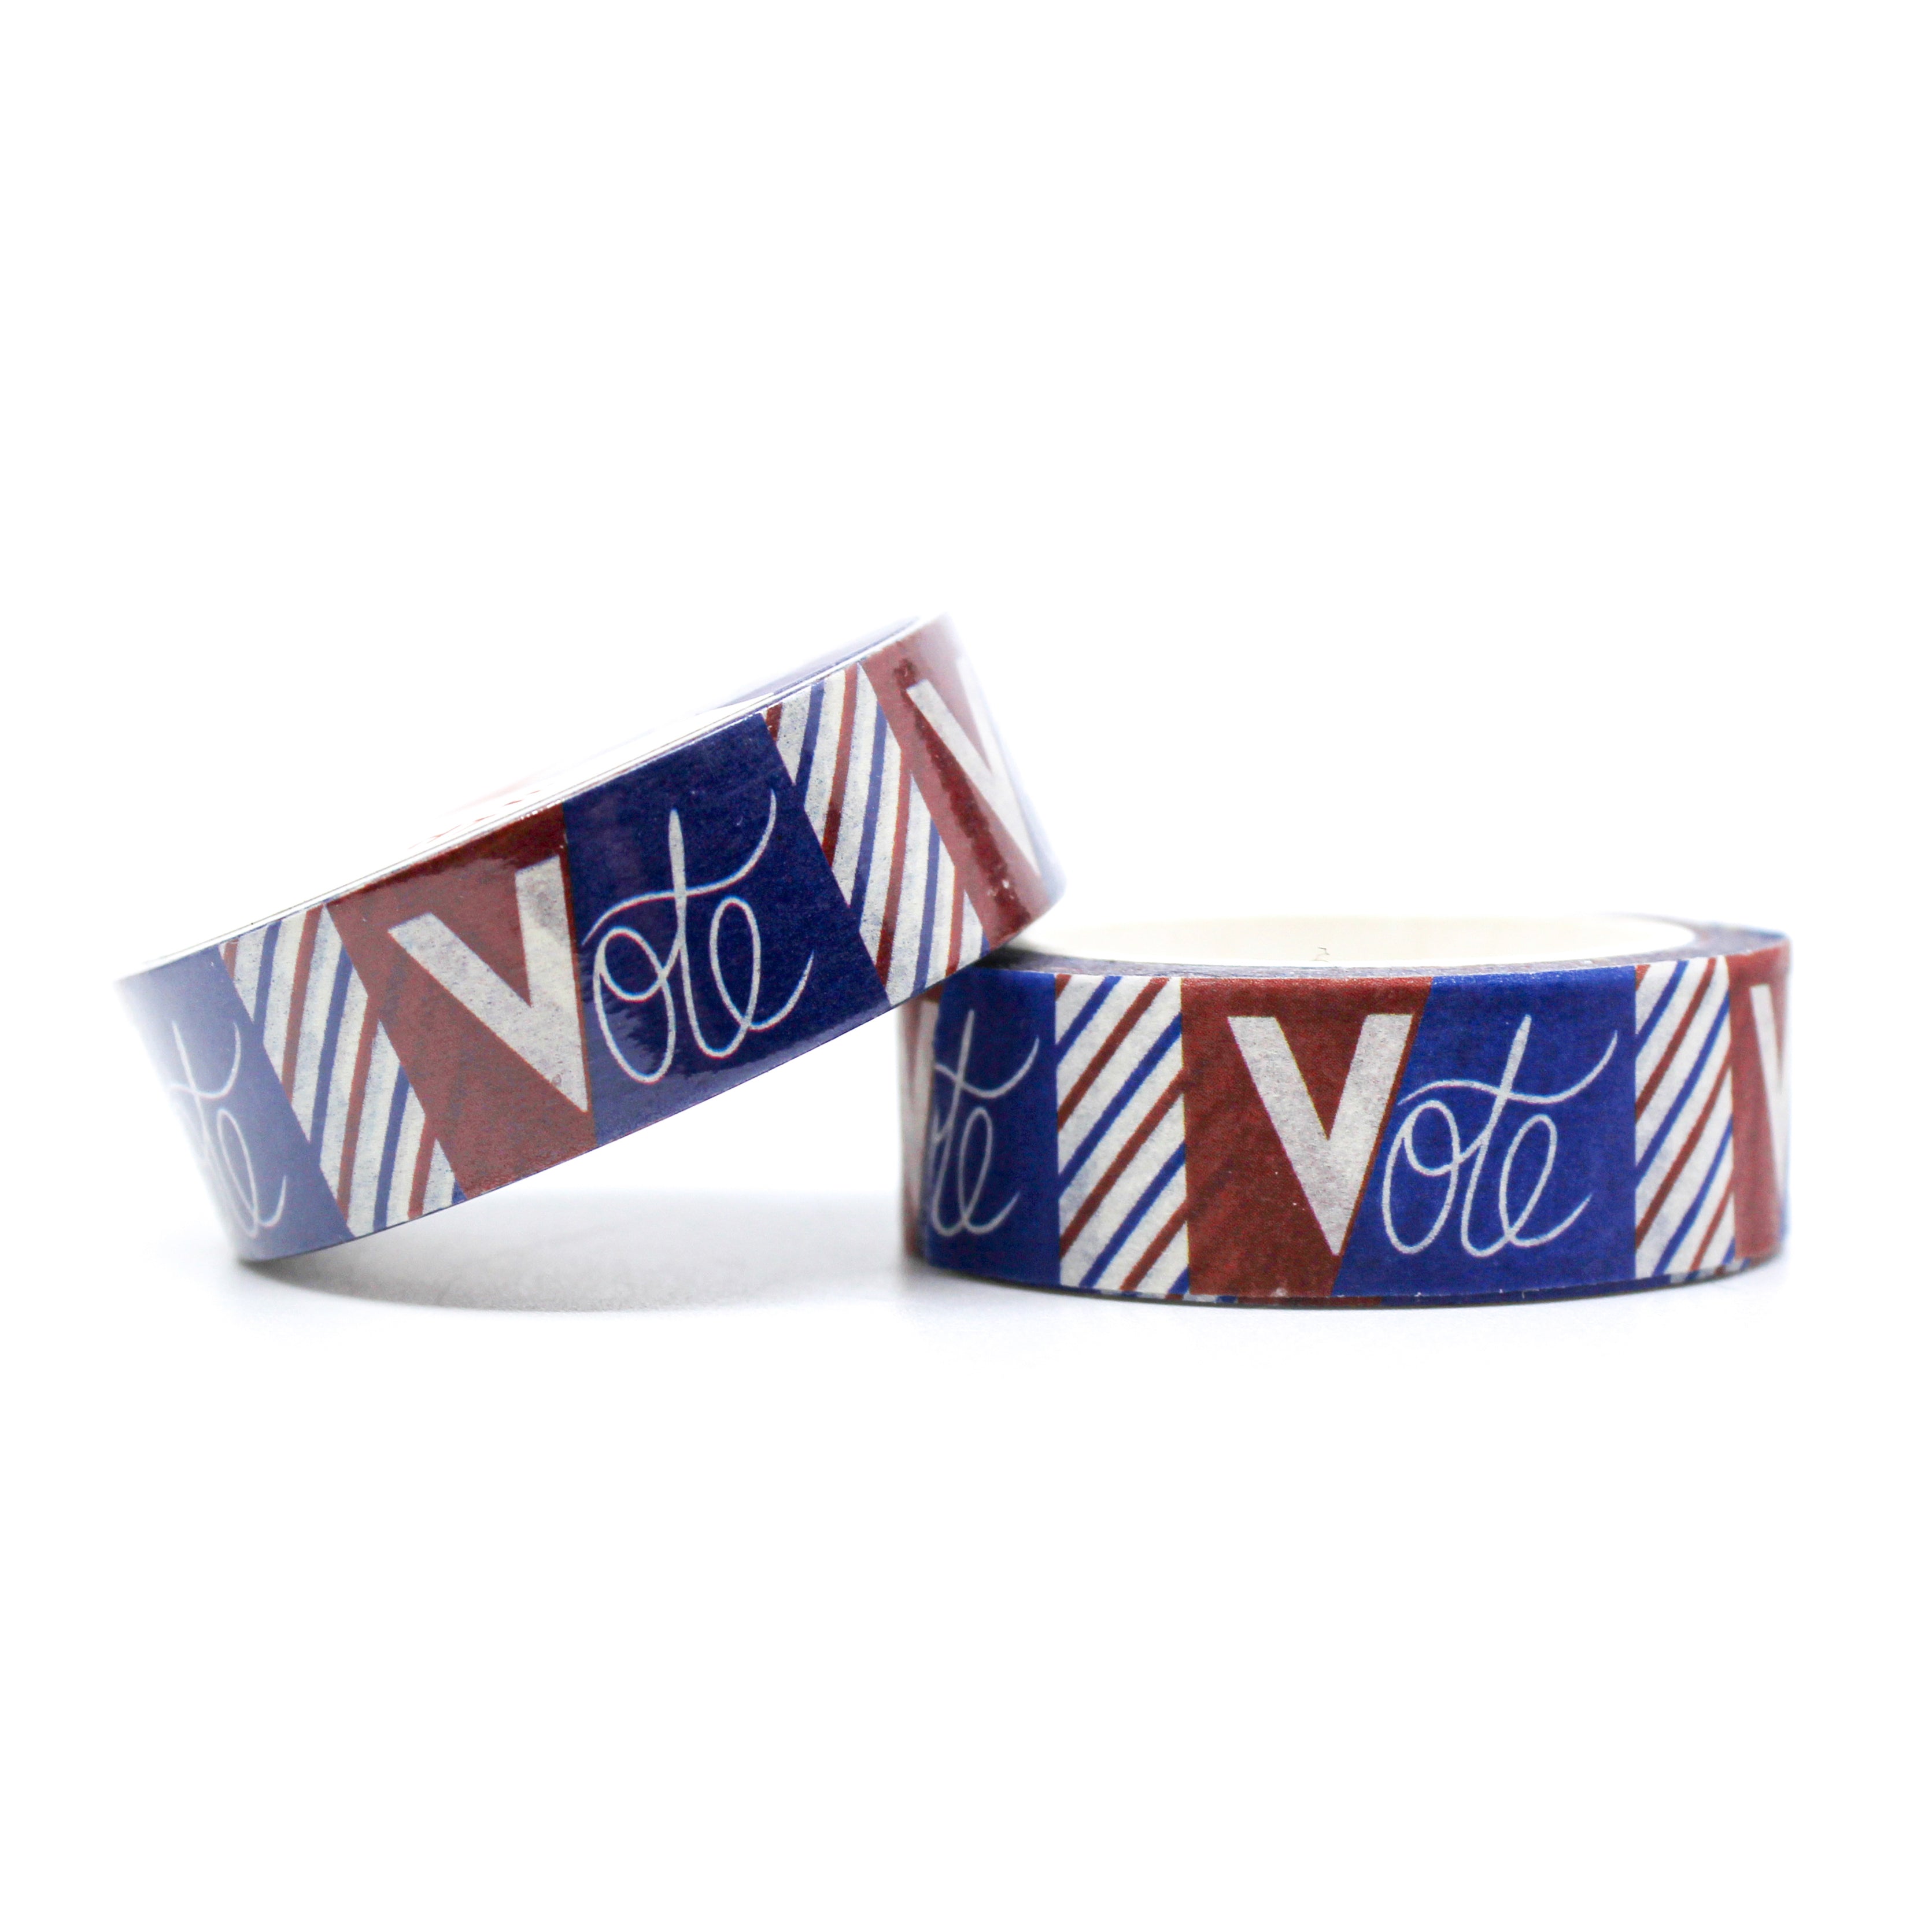 This is a roll of democracy red white and blue stripe vote text washi tapes from BBB Supplies Craft Shop